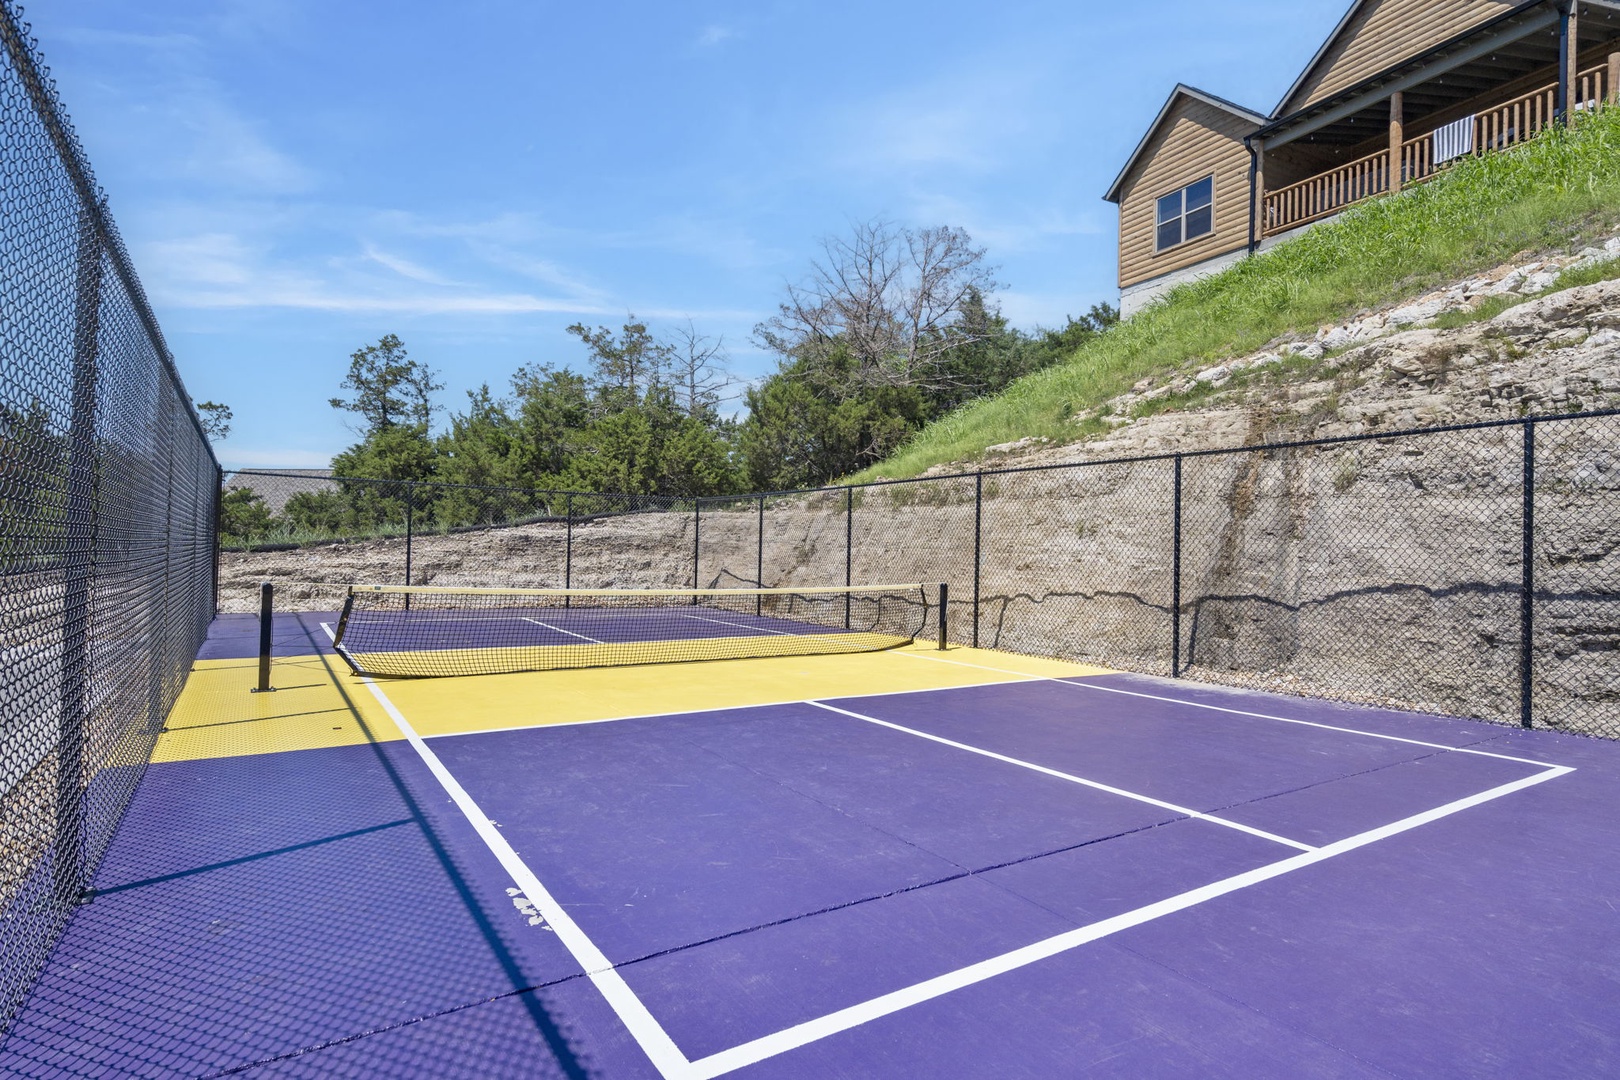 Pickleball court steps away from the front door.